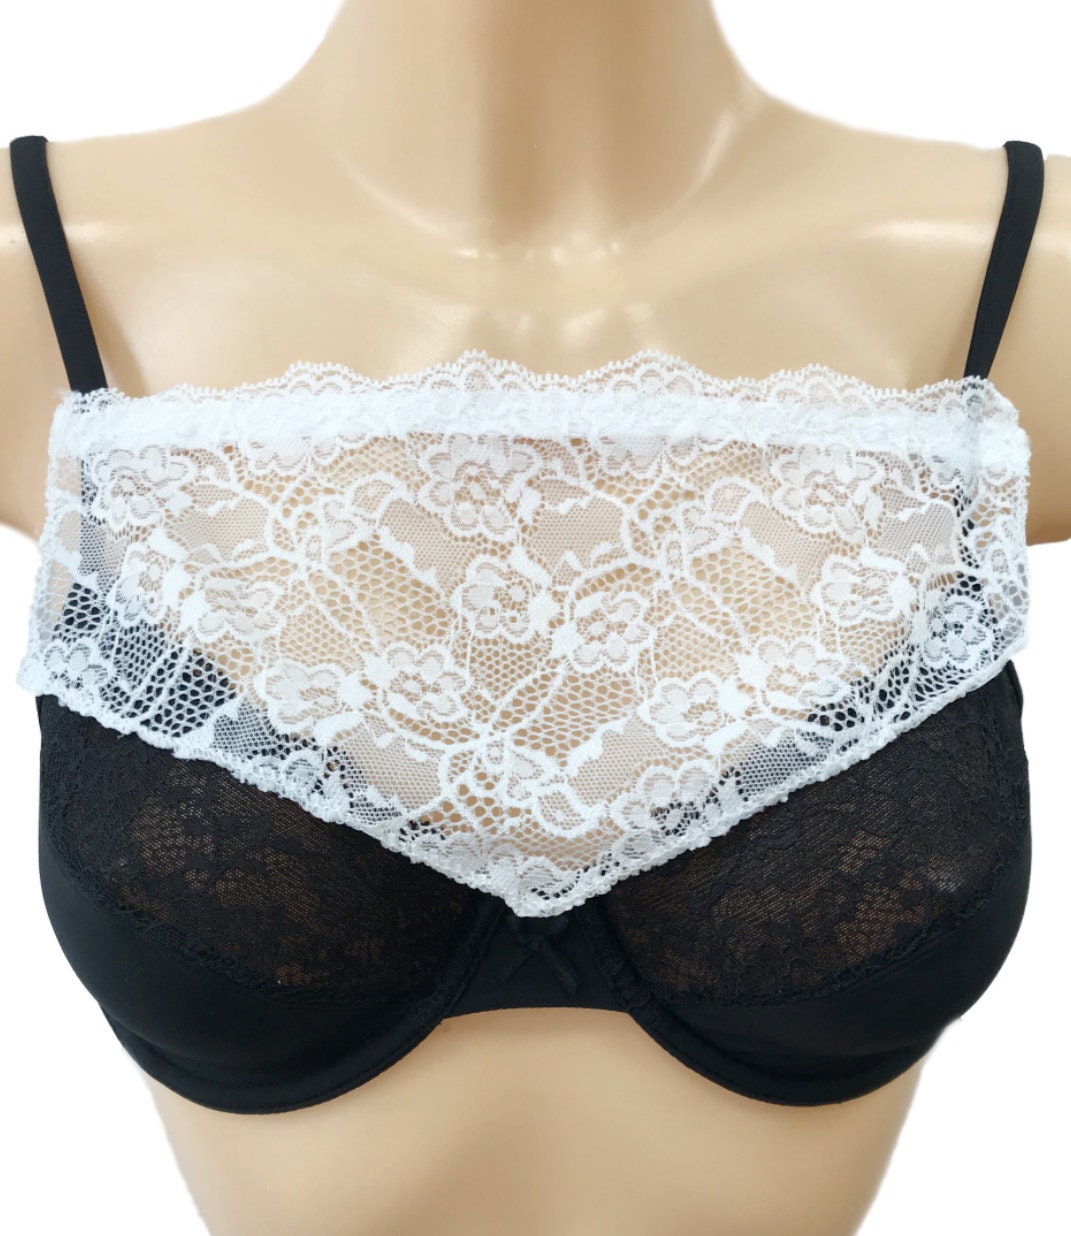 Modesty Panel White Lace Bra Insert Instant Camisole Chest Cover